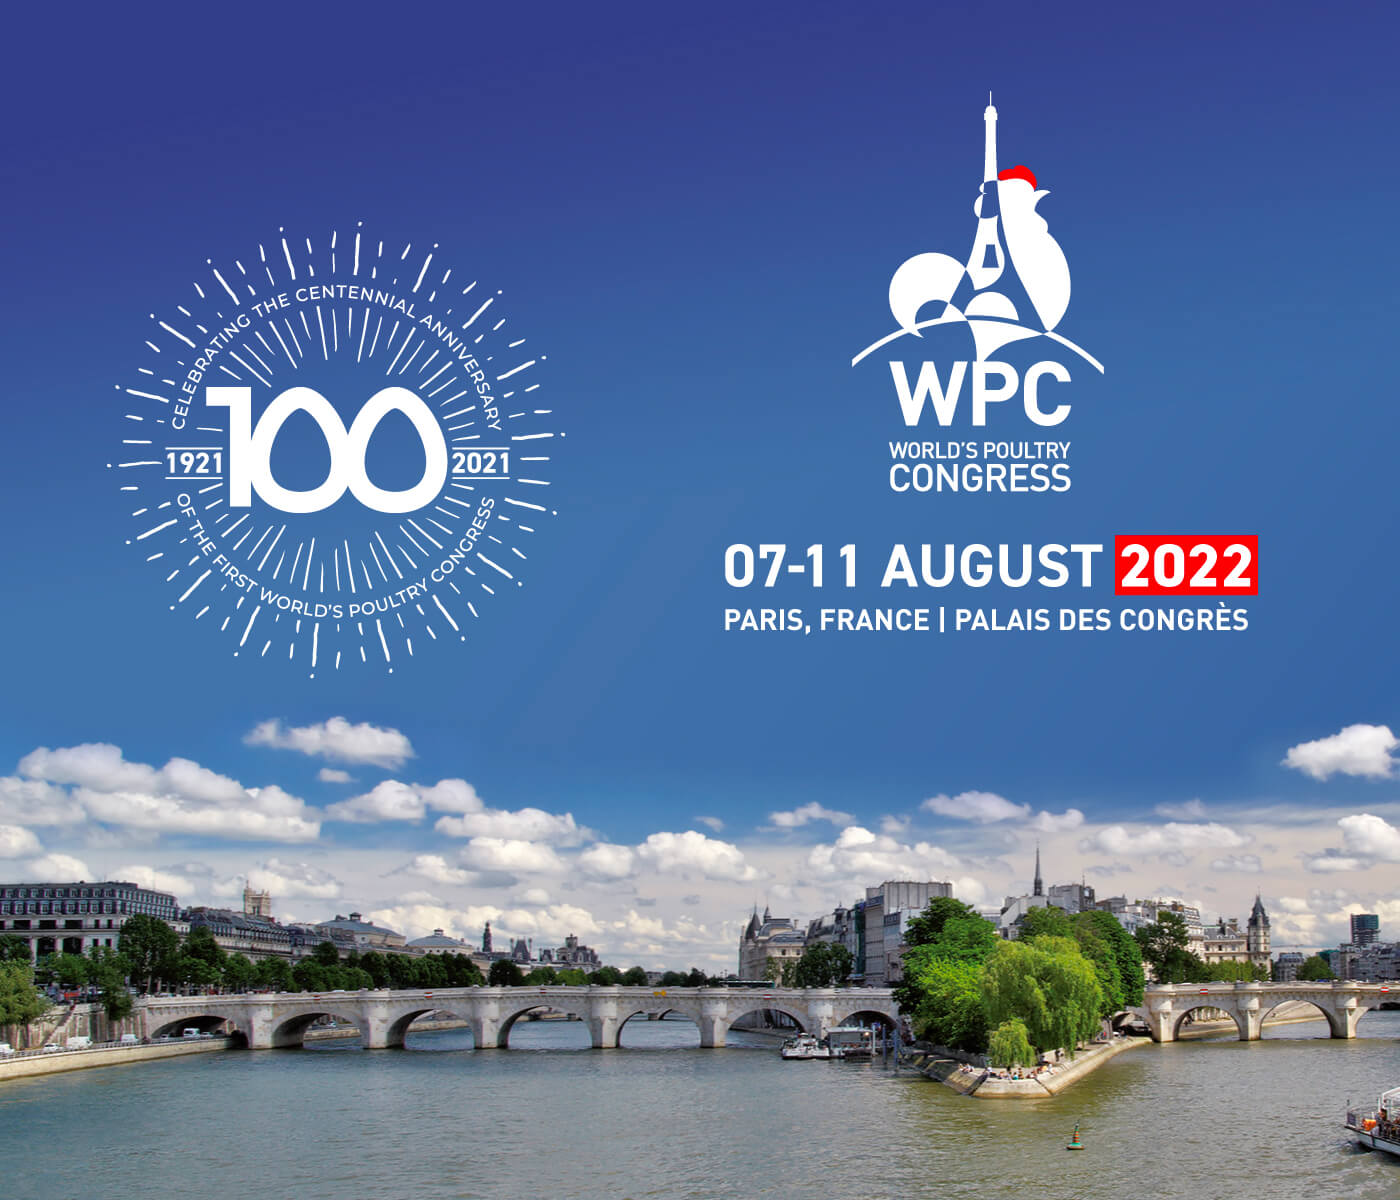 The World’s Poultry Congress is taking place soon!